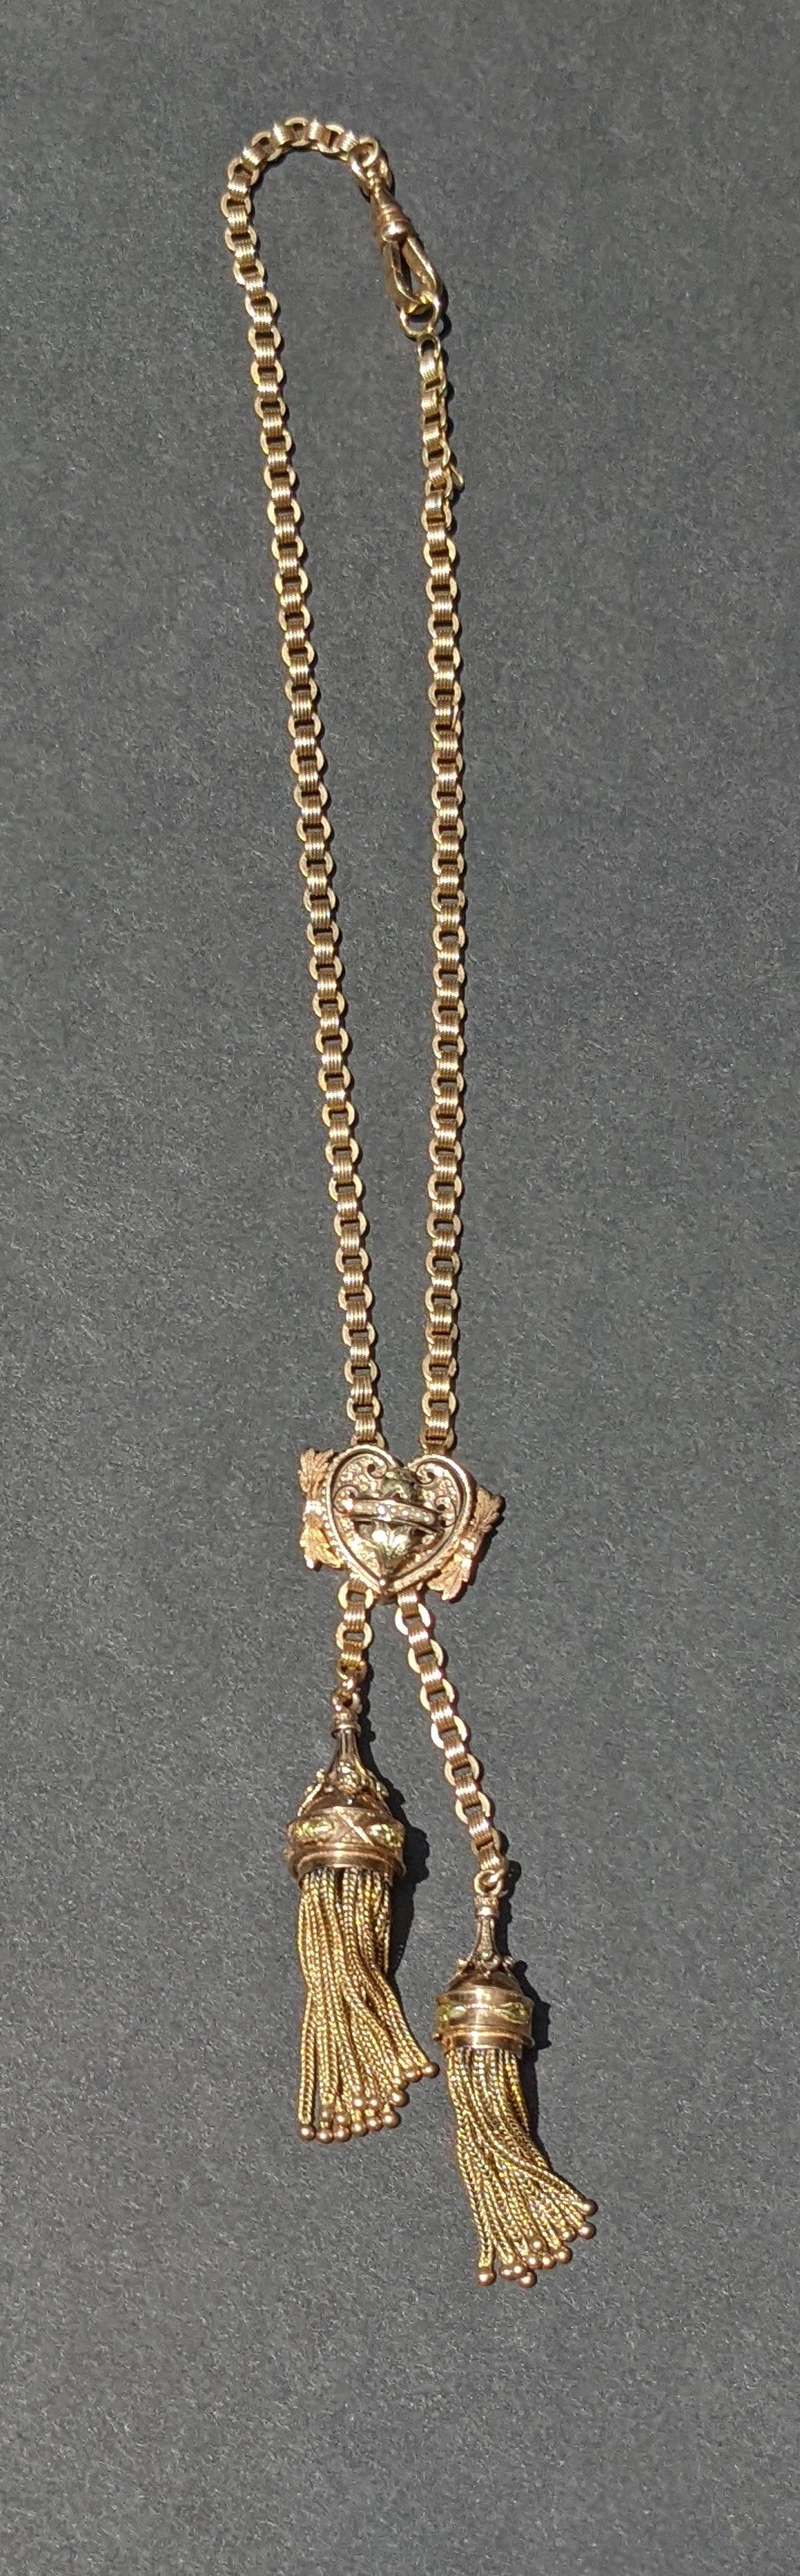 Elaborate 14kt chain necklace with pearl and enamel slide and tassels